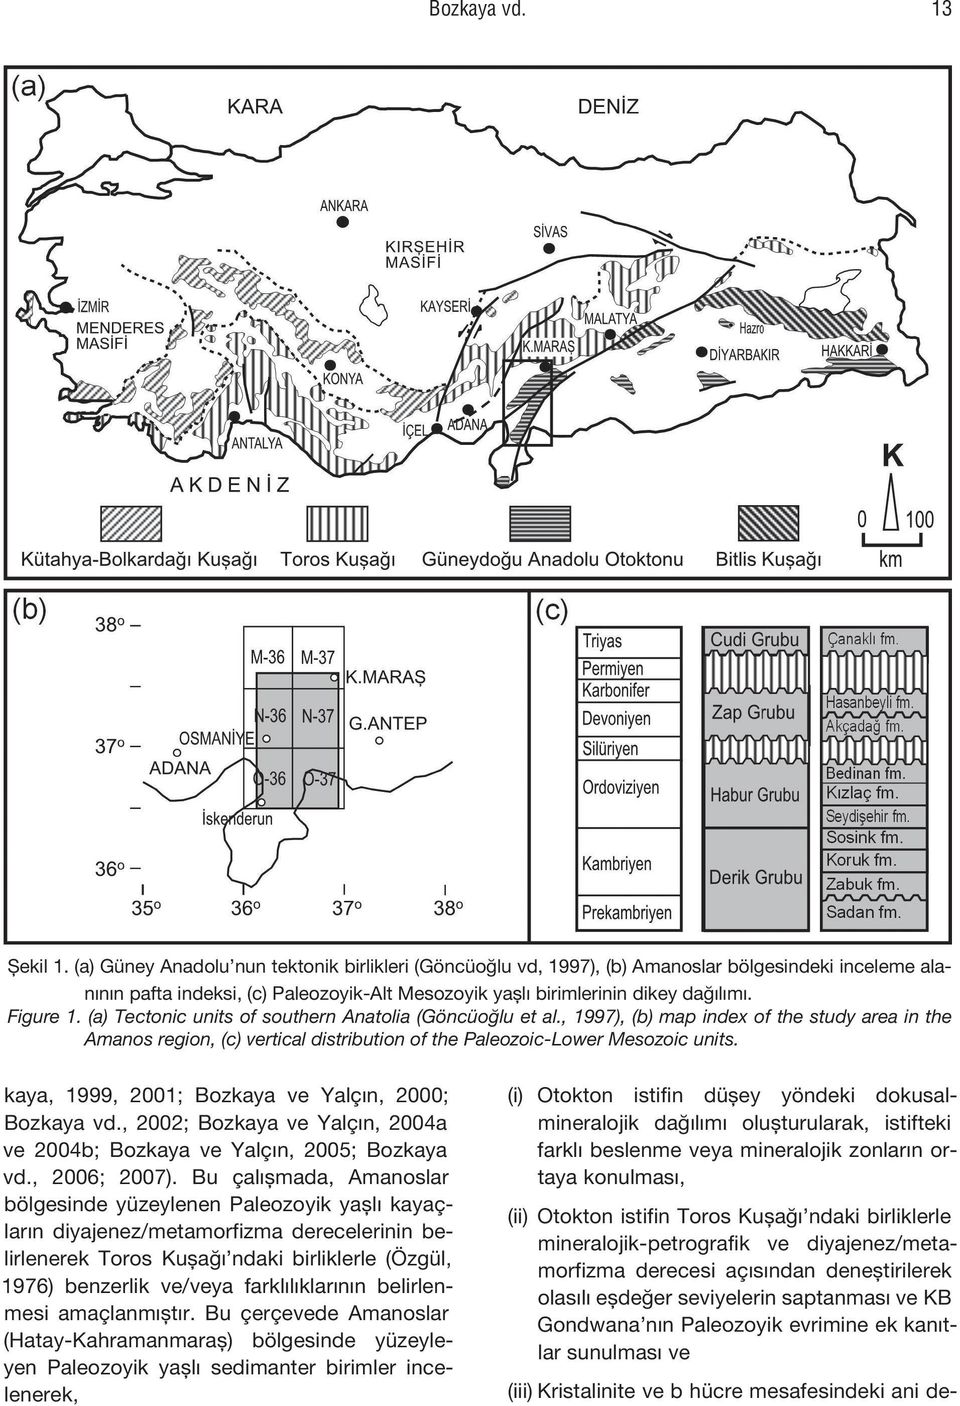 (a) Tectonic units of southern Anatolia (Göncüoğlu et al., 1997), (b) map index of the study area in the Amanos region, (c) vertical distribution of the Paleozoic-Lower Mesozoic units.